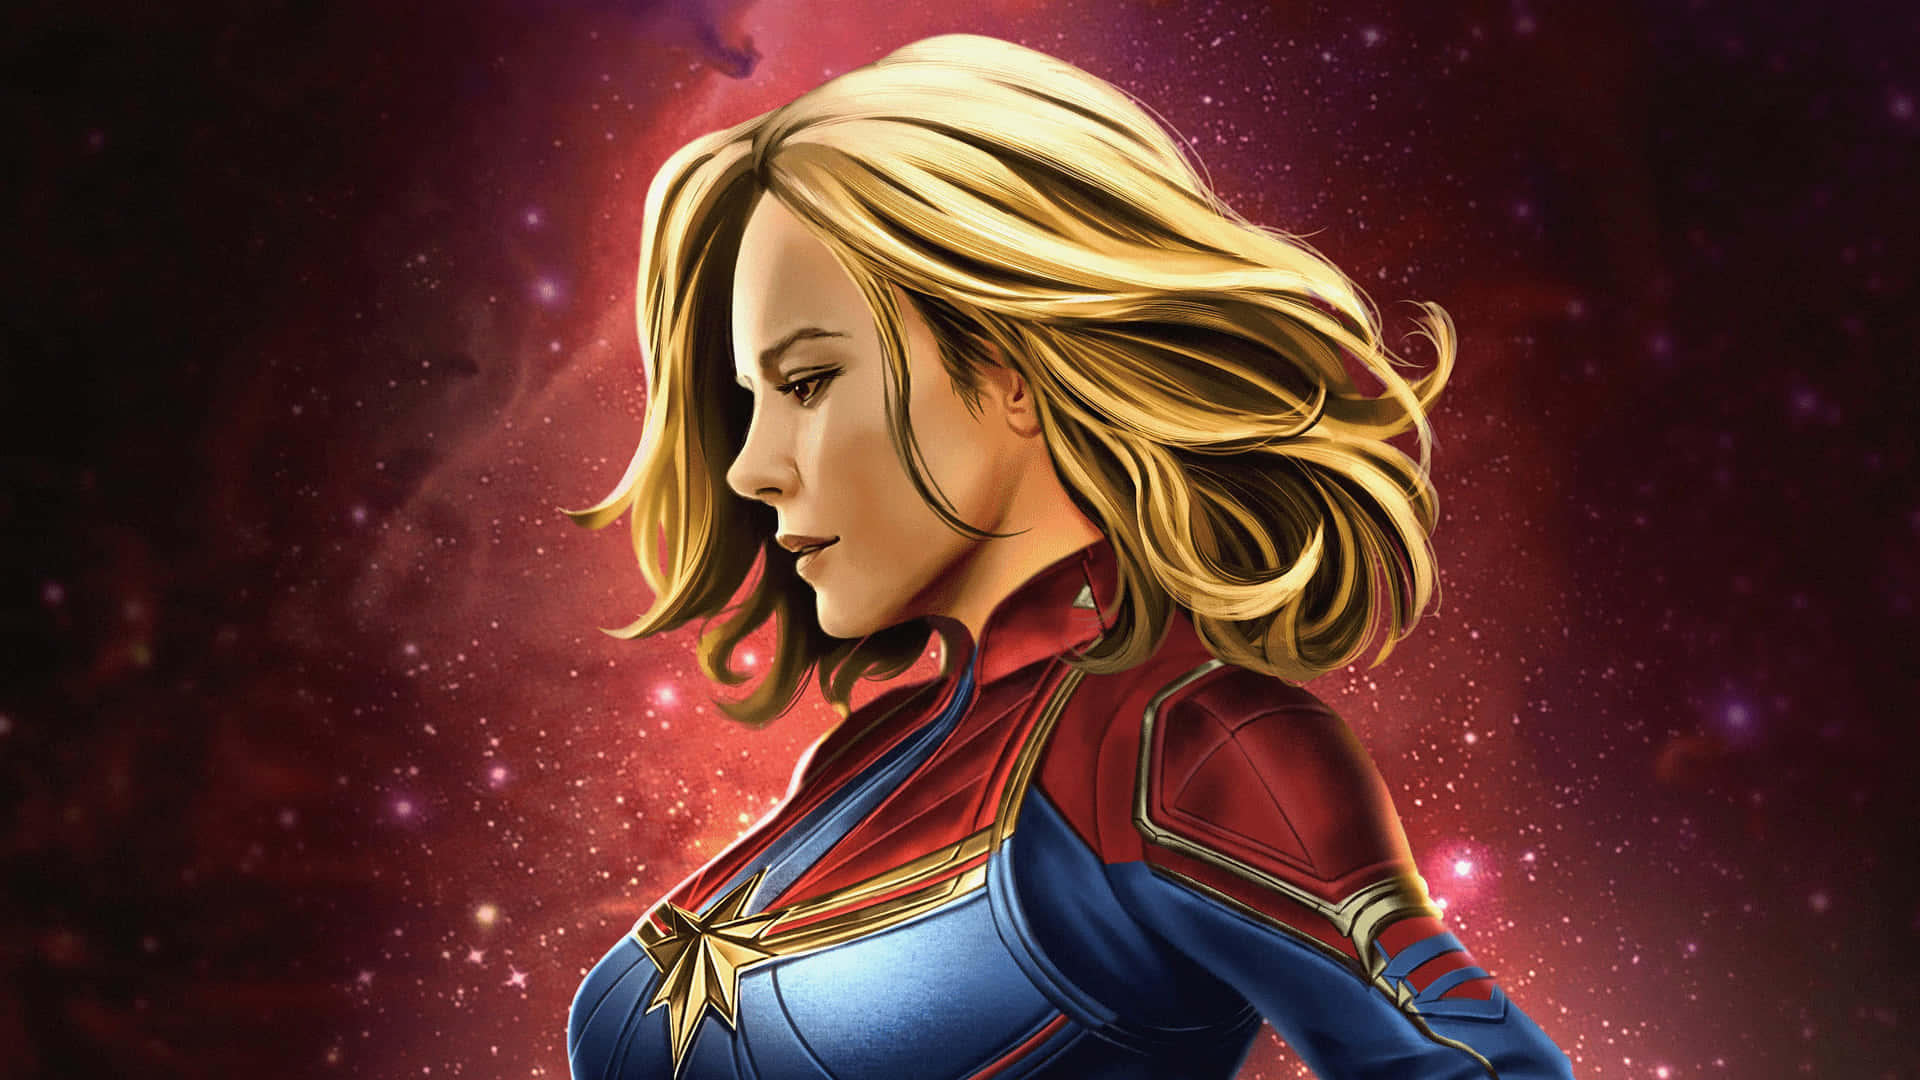 Experience new journeys with Captain Marvel using the ultimate in iPad technology Wallpaper